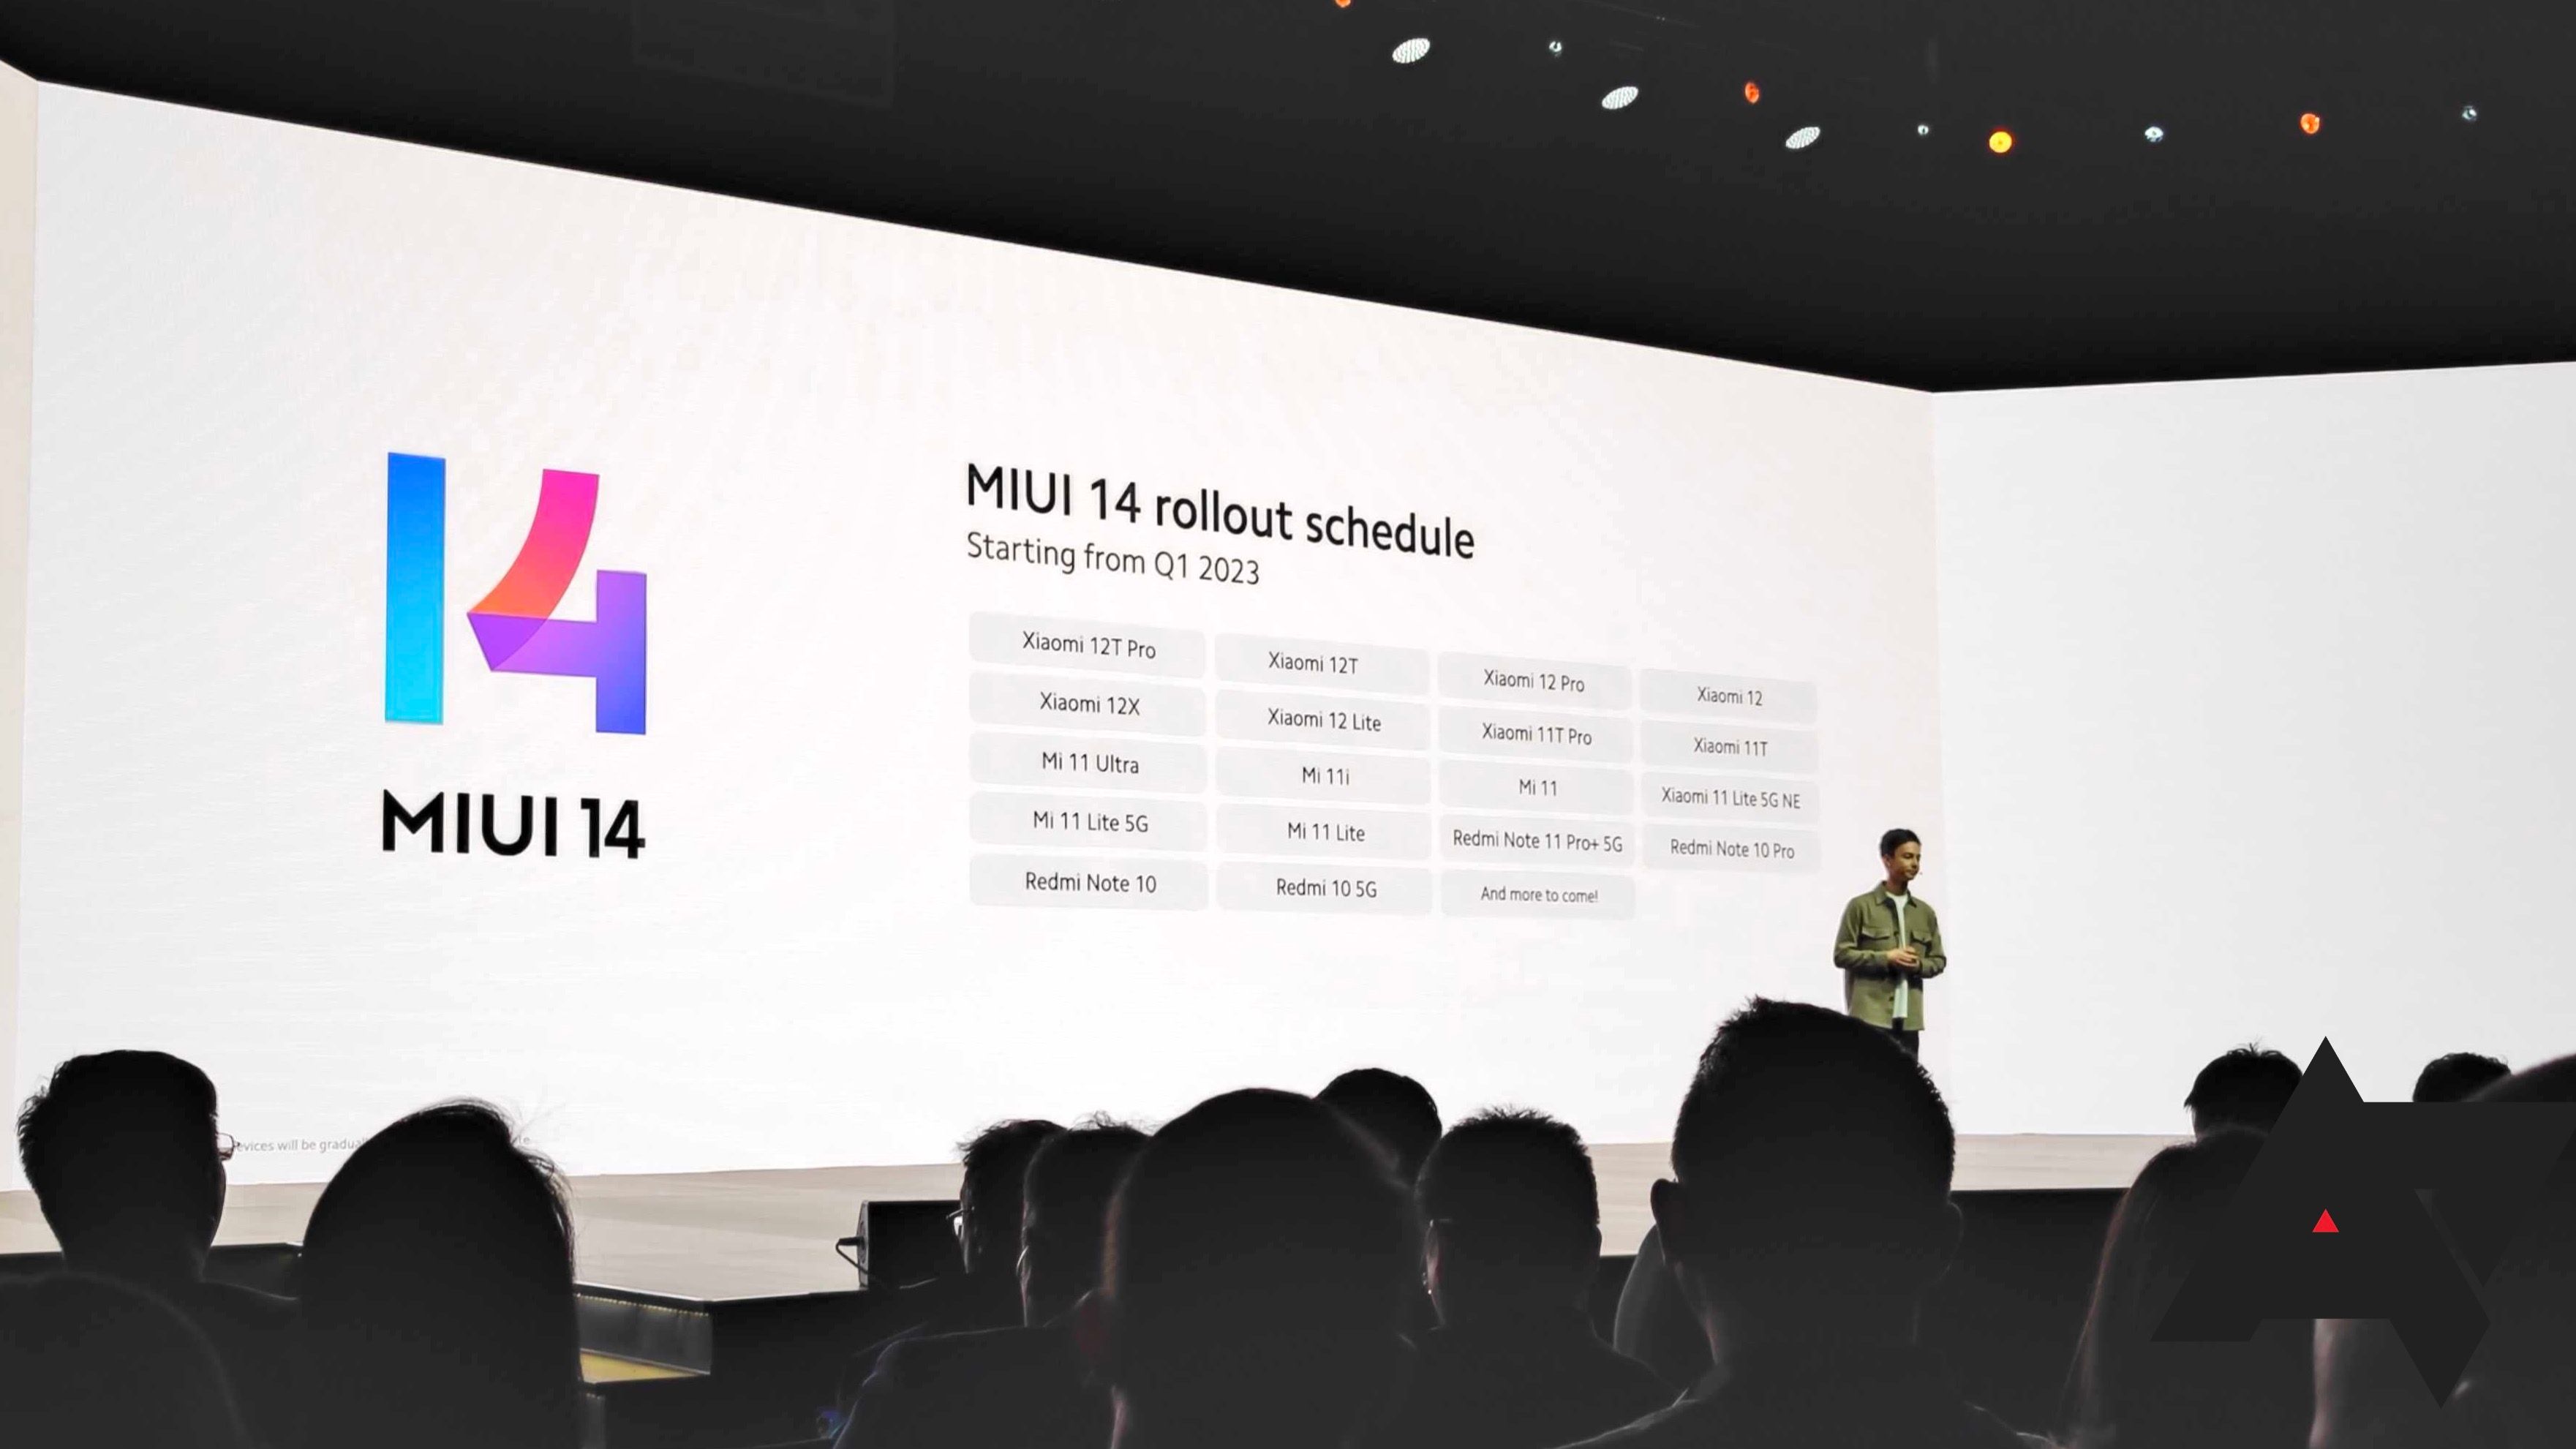 MIUI 14 rollout schedule for Xiaomi and Redmi phones 